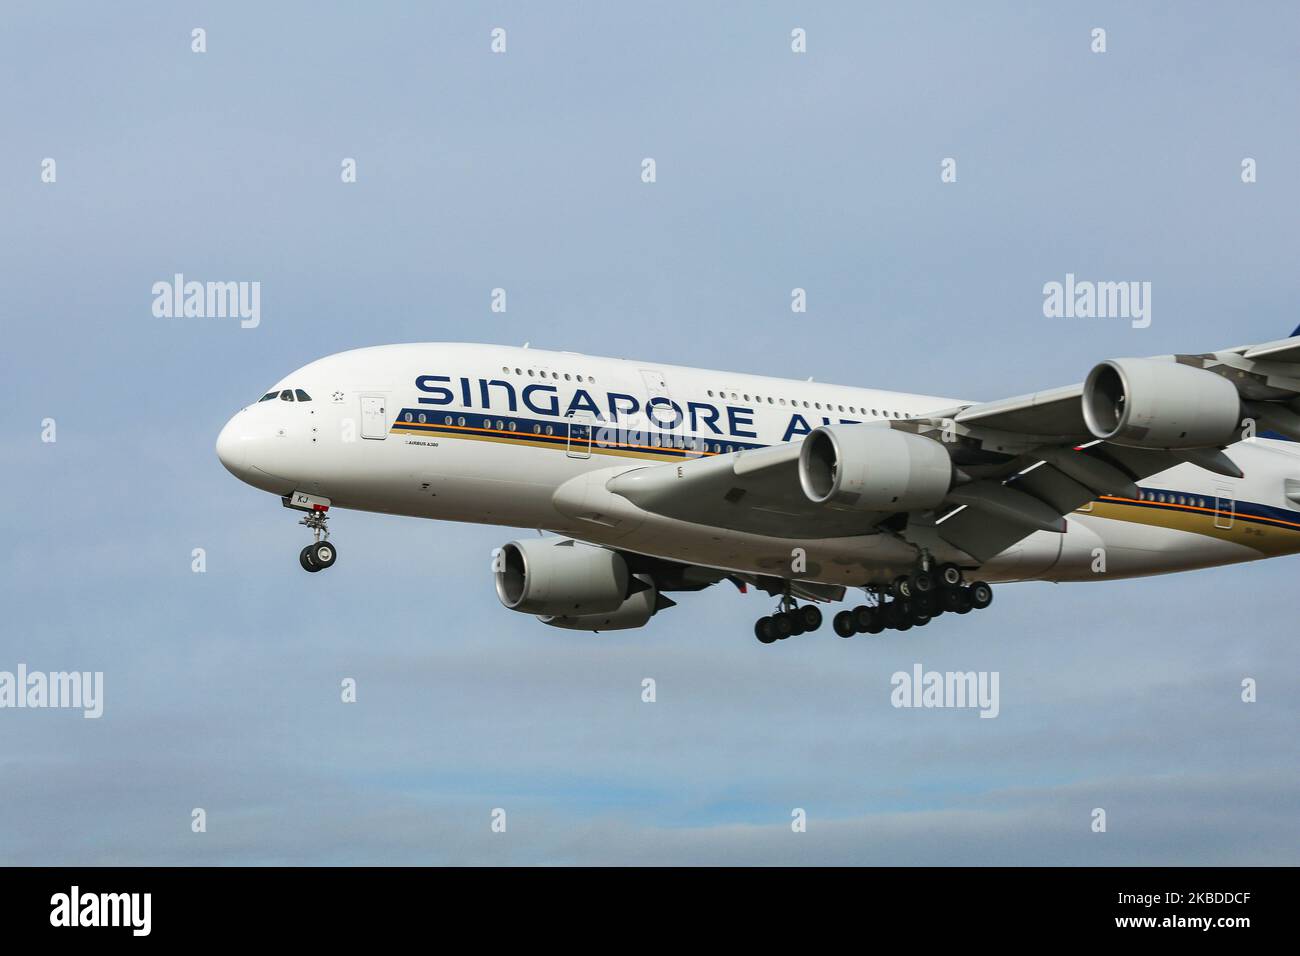 Singapore Airlines Airbus A380, specifically A380-841 aircraft as seen on final approach landing at New York JFK, John F. Kennedy International Airport on 14 November 2019. The wide-body, double-decker long haul airplane has the registration 9V-SKJ and is powered by 4x RR ( Rolls Royce ) jet engines. Singapore SQ, SIA is the flag carrier airline of Singapore, with a base in its hub Changi Airport SIN WSSS, a member of Star Alliance aviation alliance. The airline has been awarded by Skytrax as Best Airline of the World. (Photo by Nicolas Economou/NurPhoto) Stock Photo